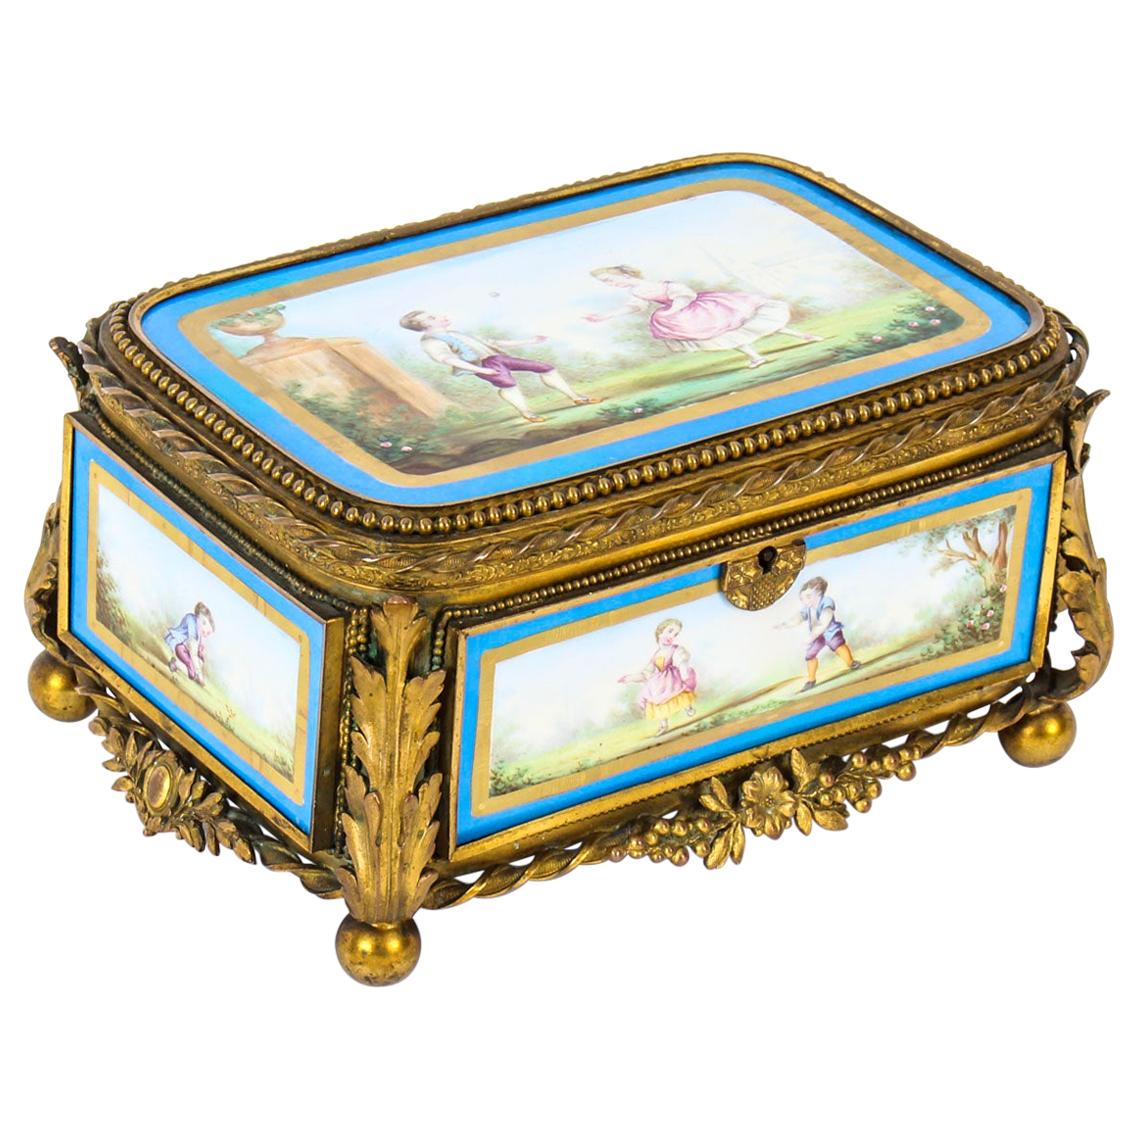 Antique French Sevres Porcelain and Ormolu Jewellery Casket, 19th Century